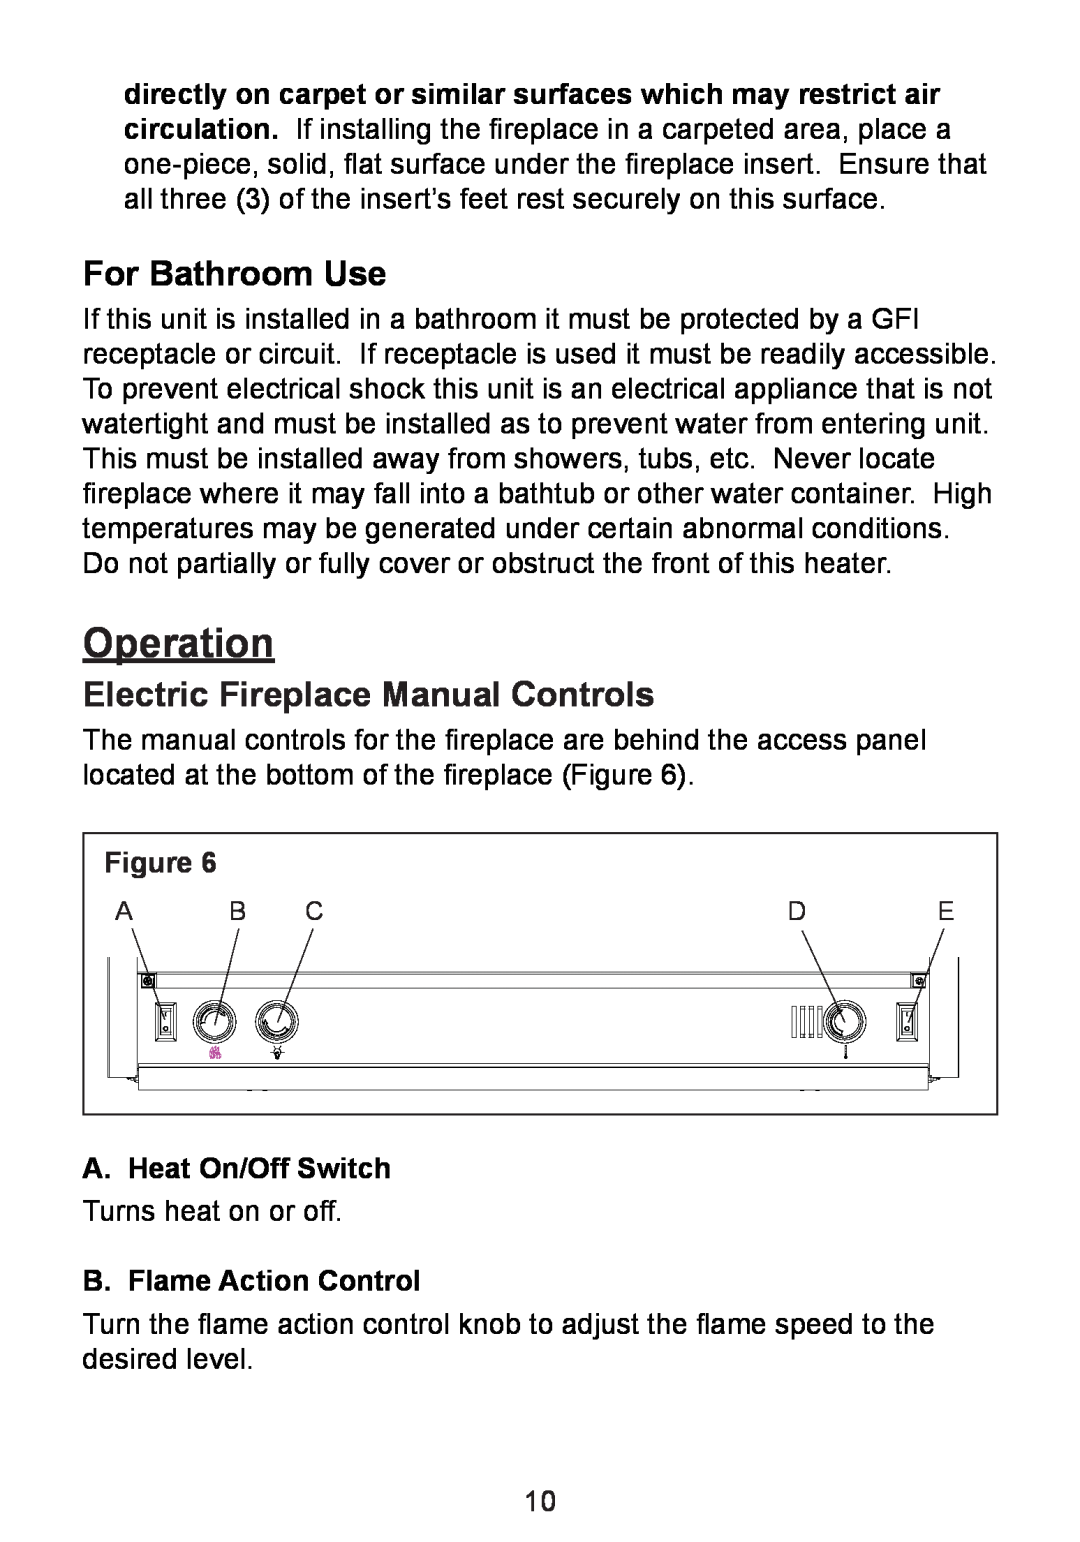 Dimplex BF8000ST owner manual Operation, For Bathroom Use, Electric Fireplace Manual Controls, A.Heat On/Off Switch 